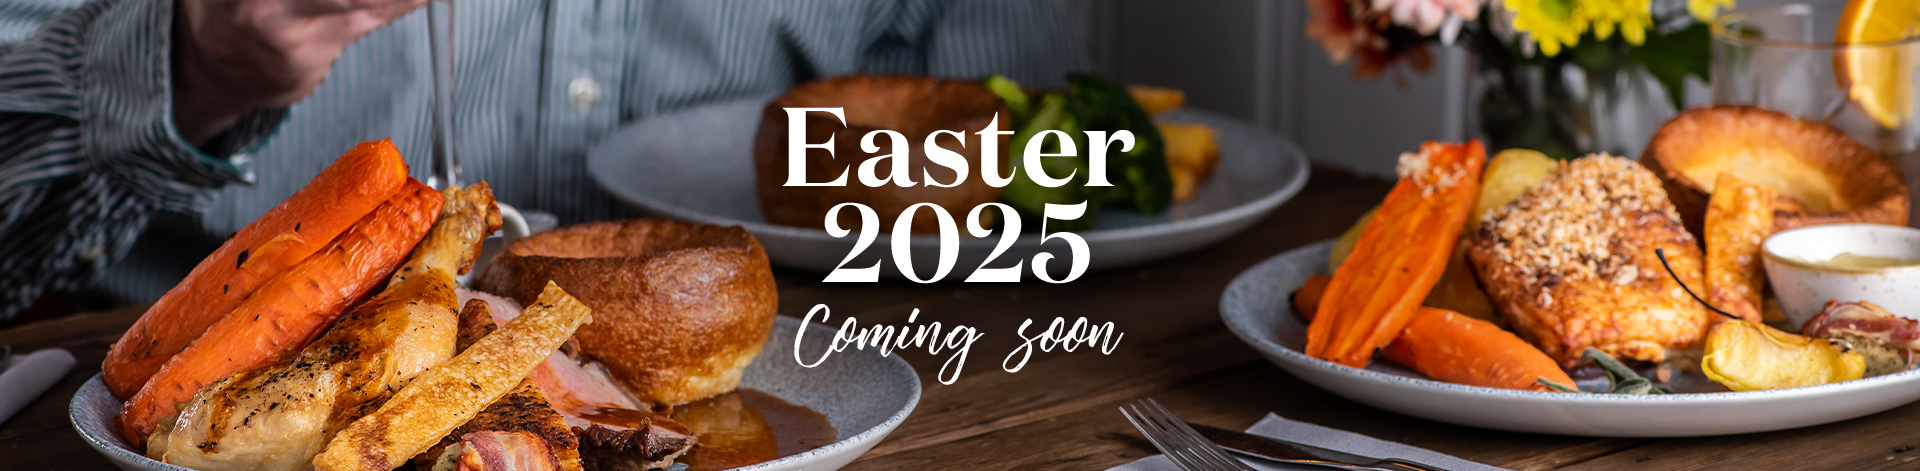 Easter at The Three Horseshoes in St Albans